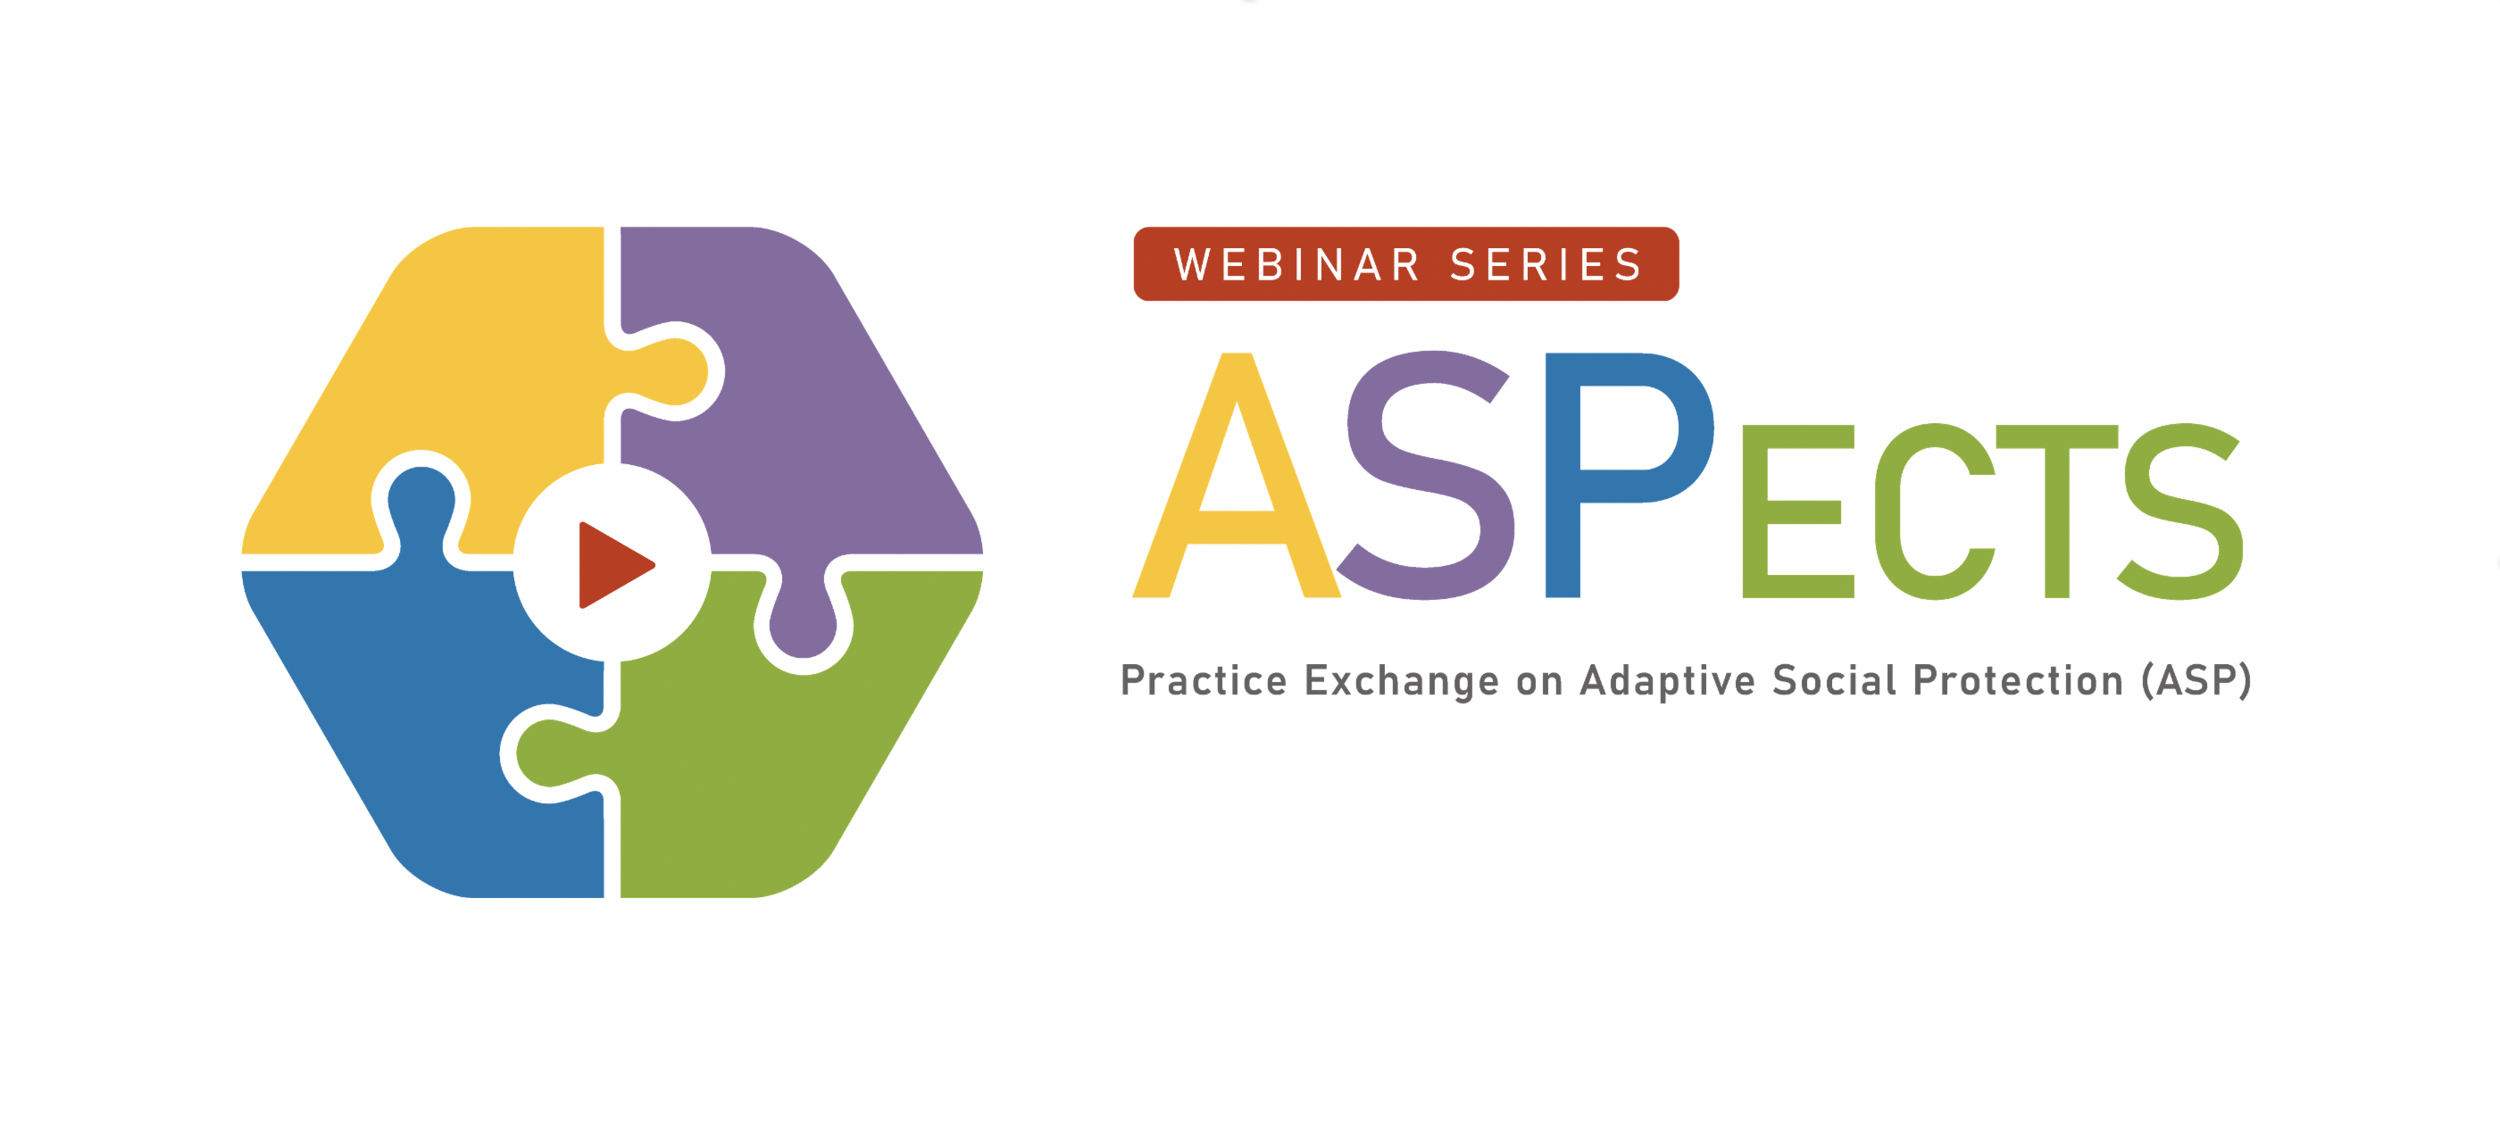 ASPects – Practice Exchange on Adaptive Social Protection